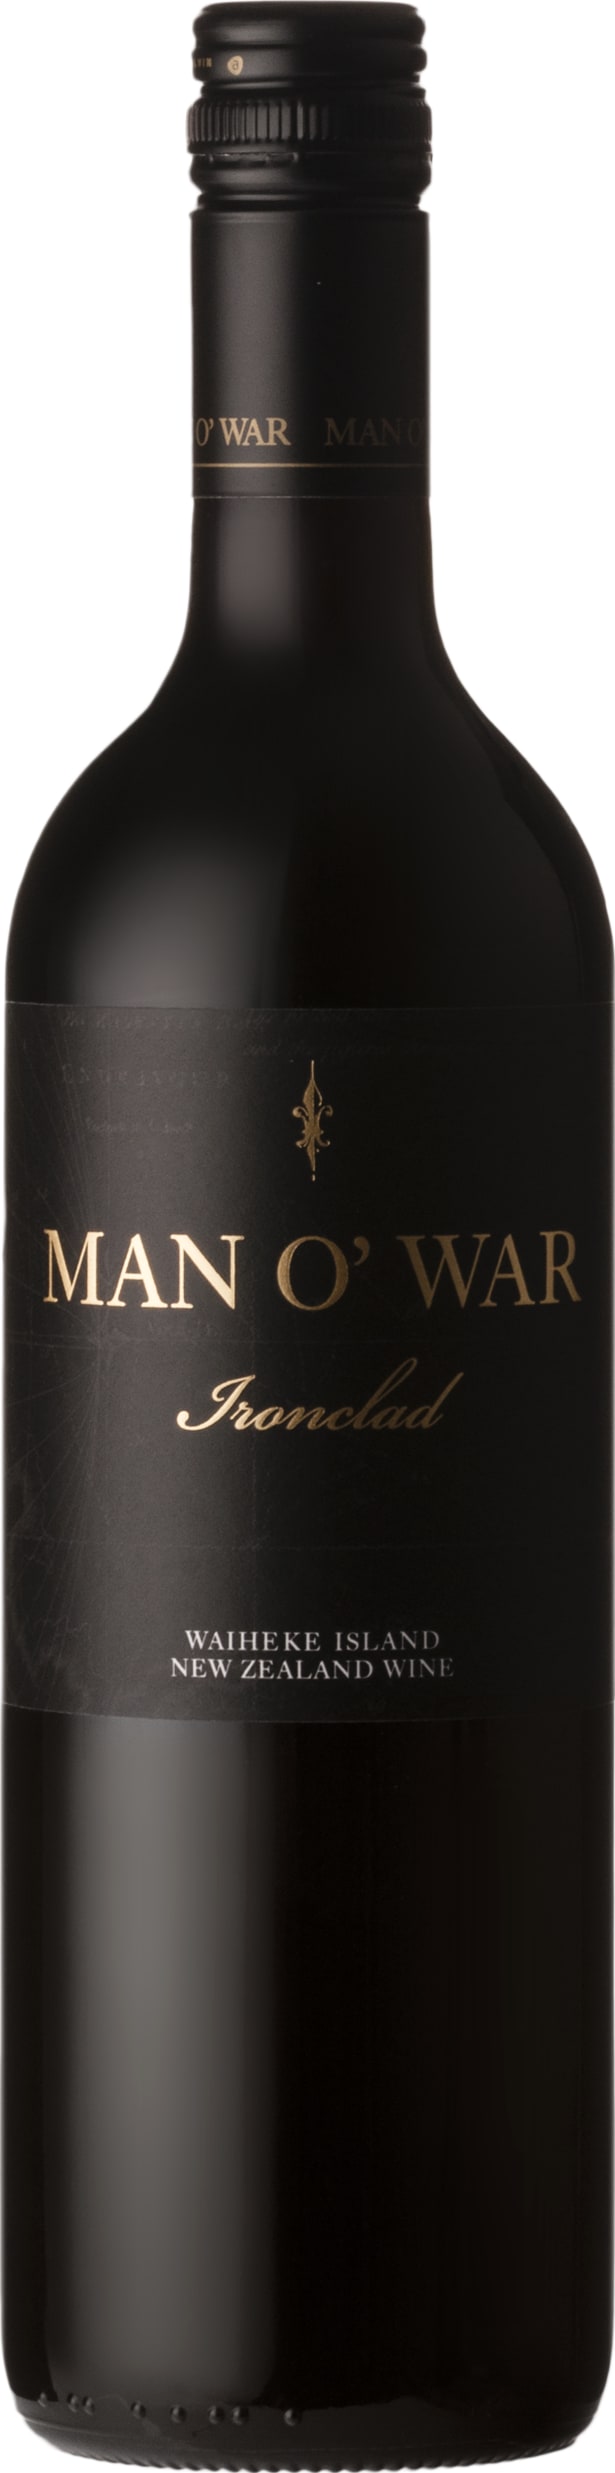 Man O' War Ironclad Merlot Cabernet Franc 2019 75cl - Buy Man O' War Wines from GREAT WINES DIRECT wine shop